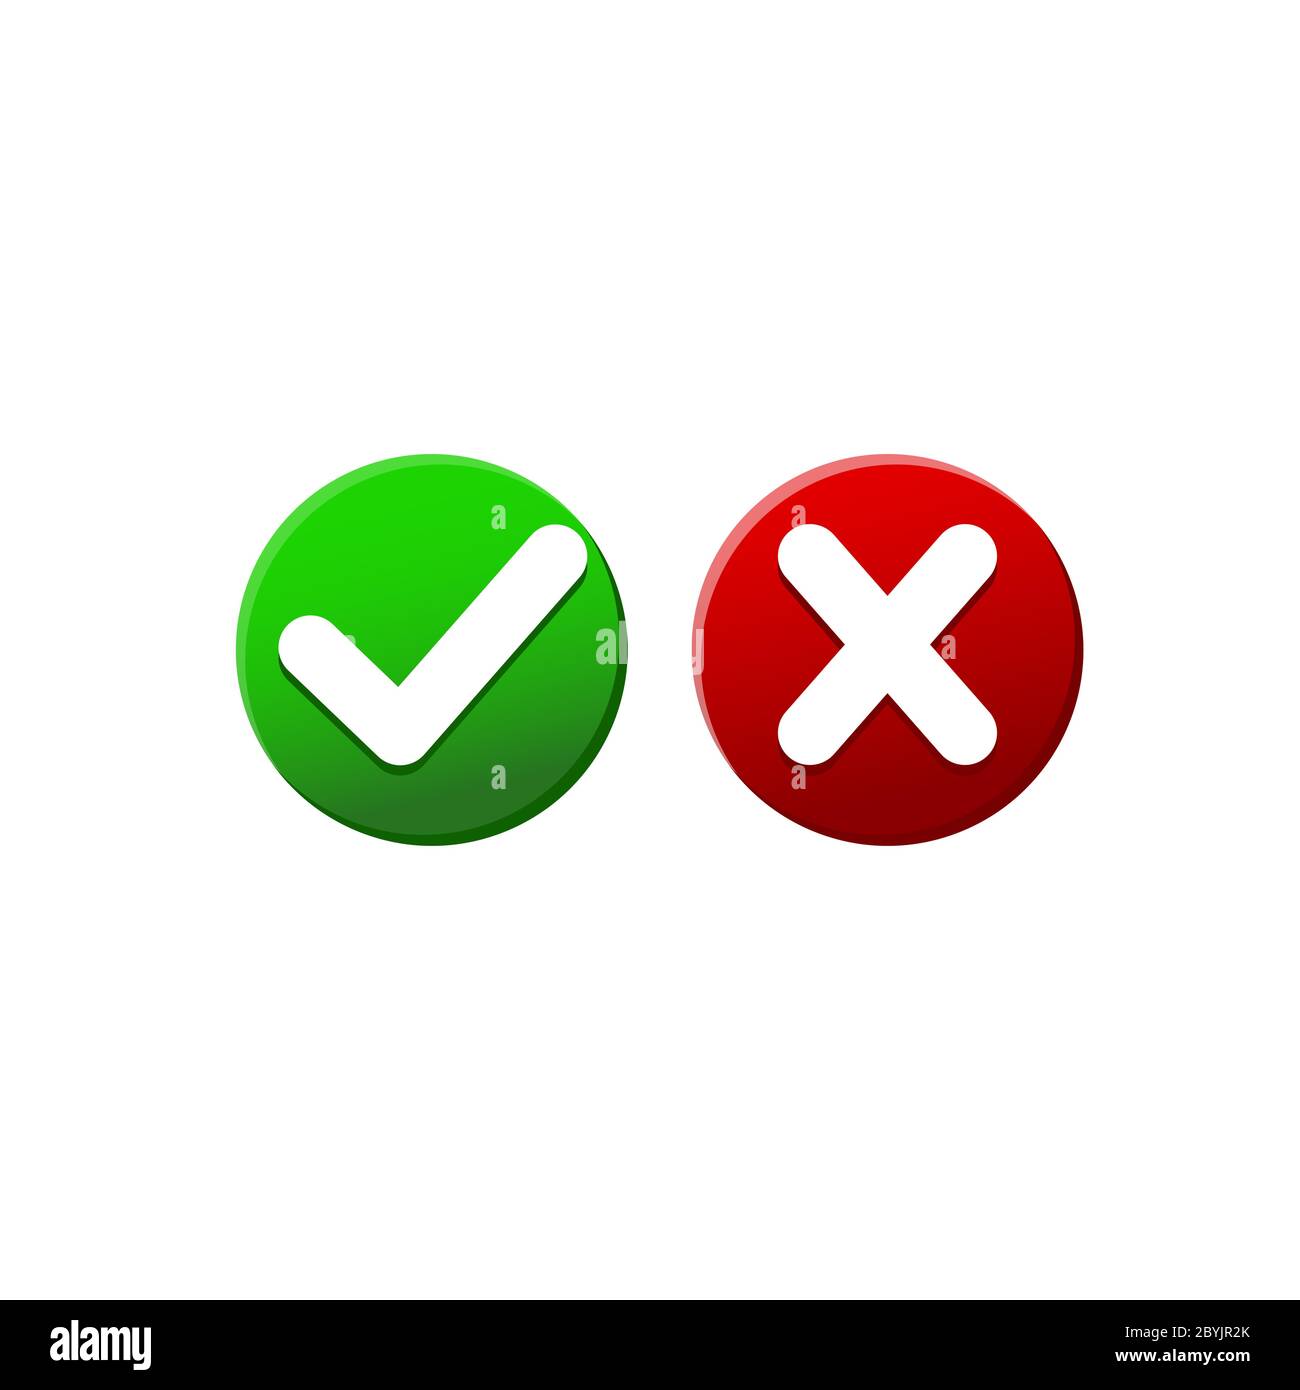 Check marks in red and green or tick, cross checkmarks flat icon